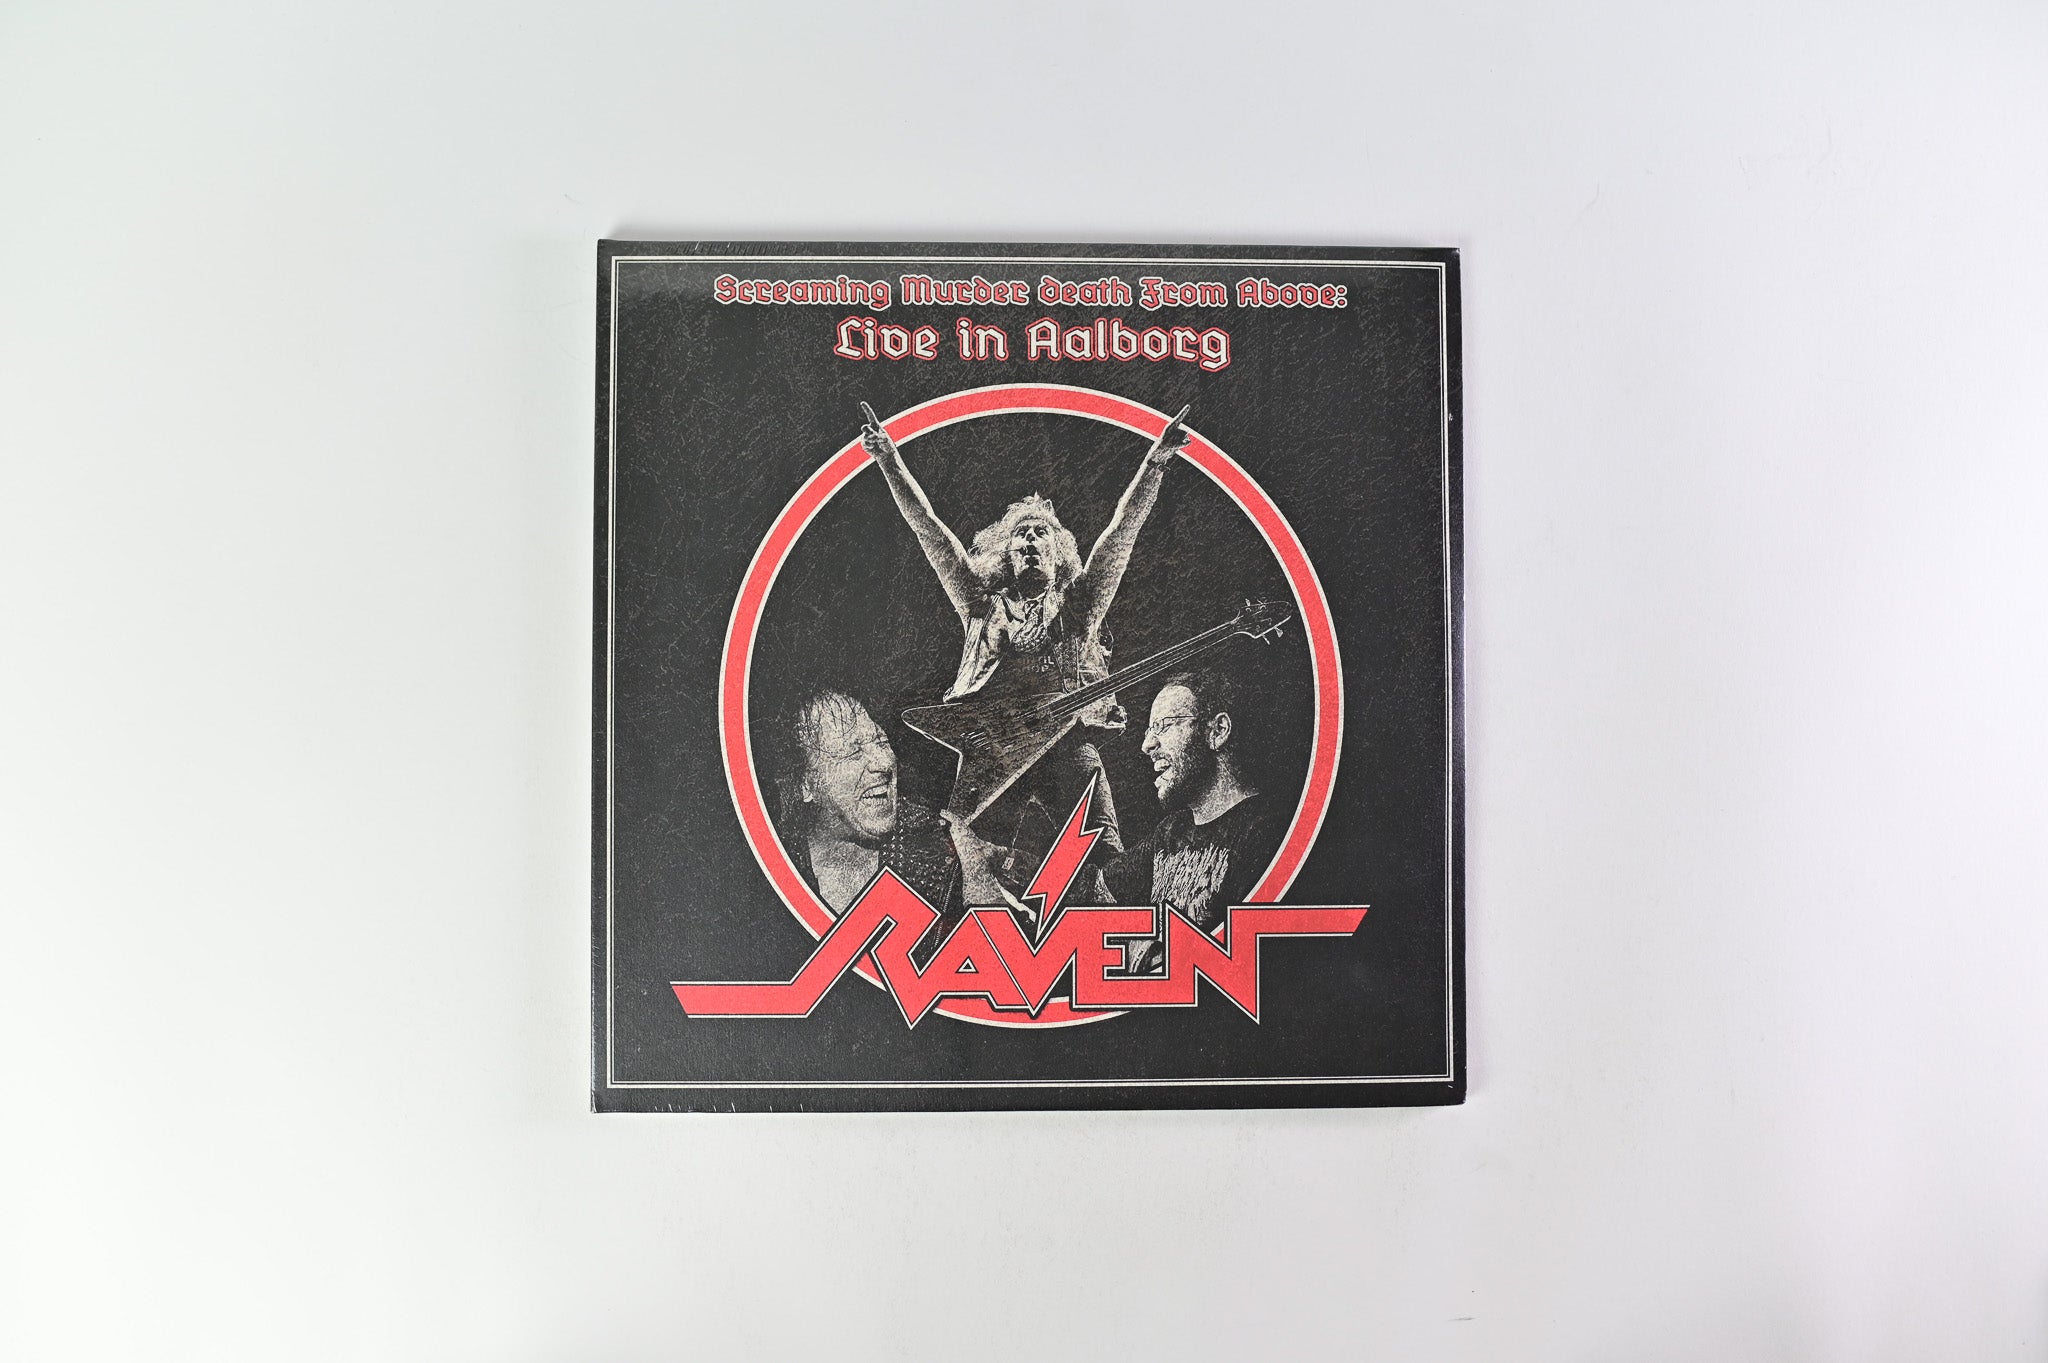 Raven - Screaming Murder Death From Above: Live In Aalborg on Steamhammer - Red Vinyl